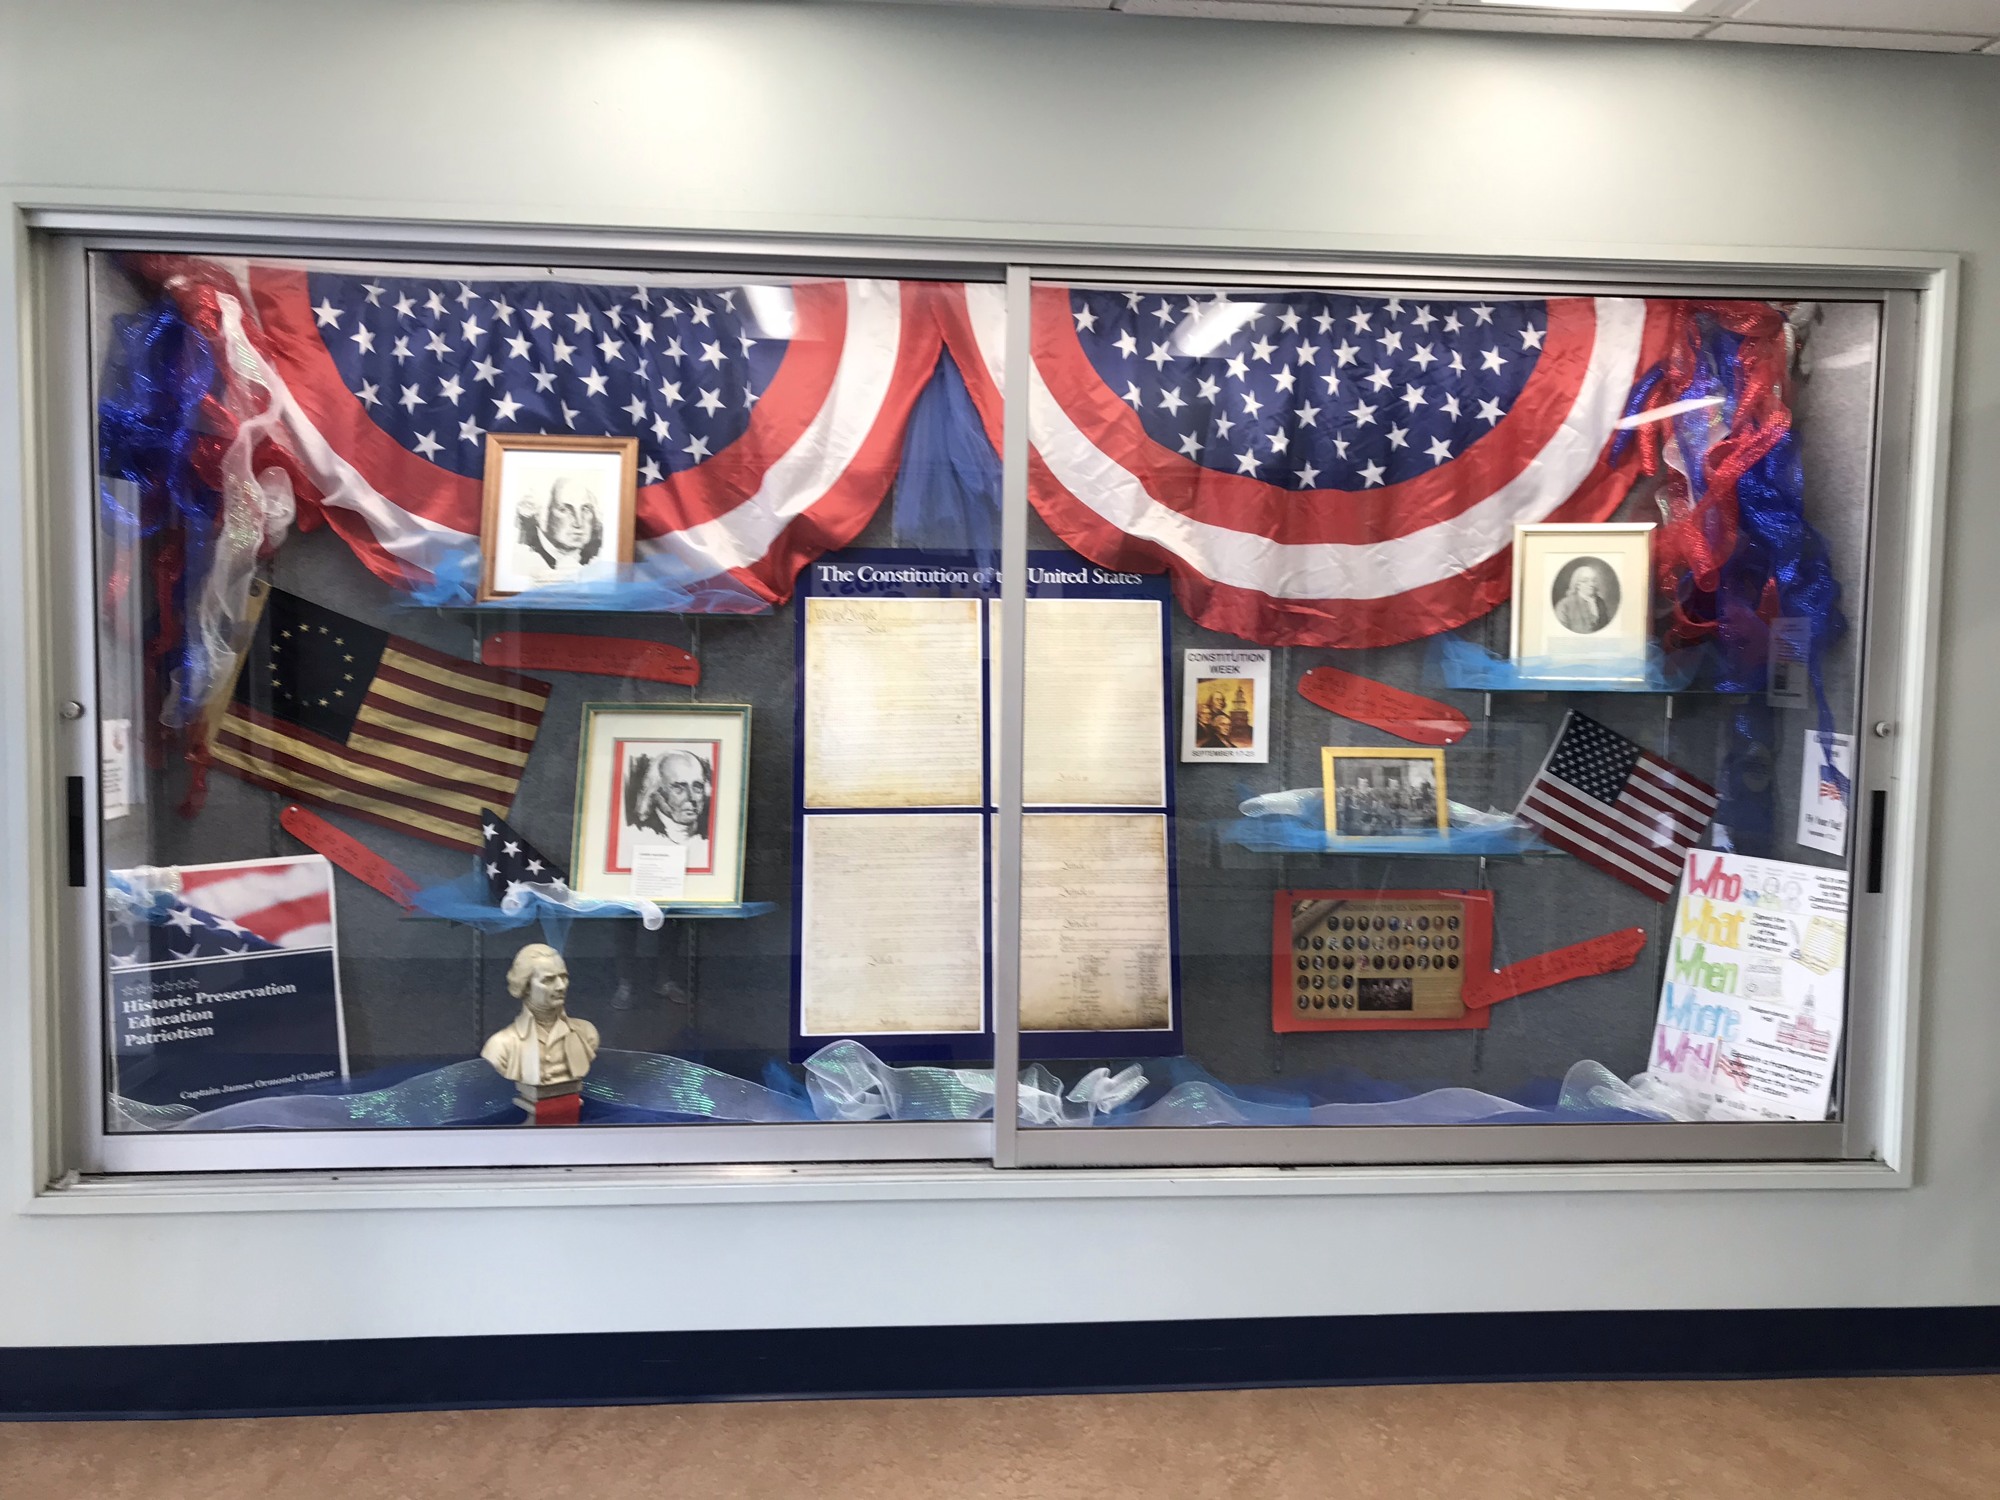 The DAR Constitution display at the Ormond Beach Regional Library. Courtesy photo